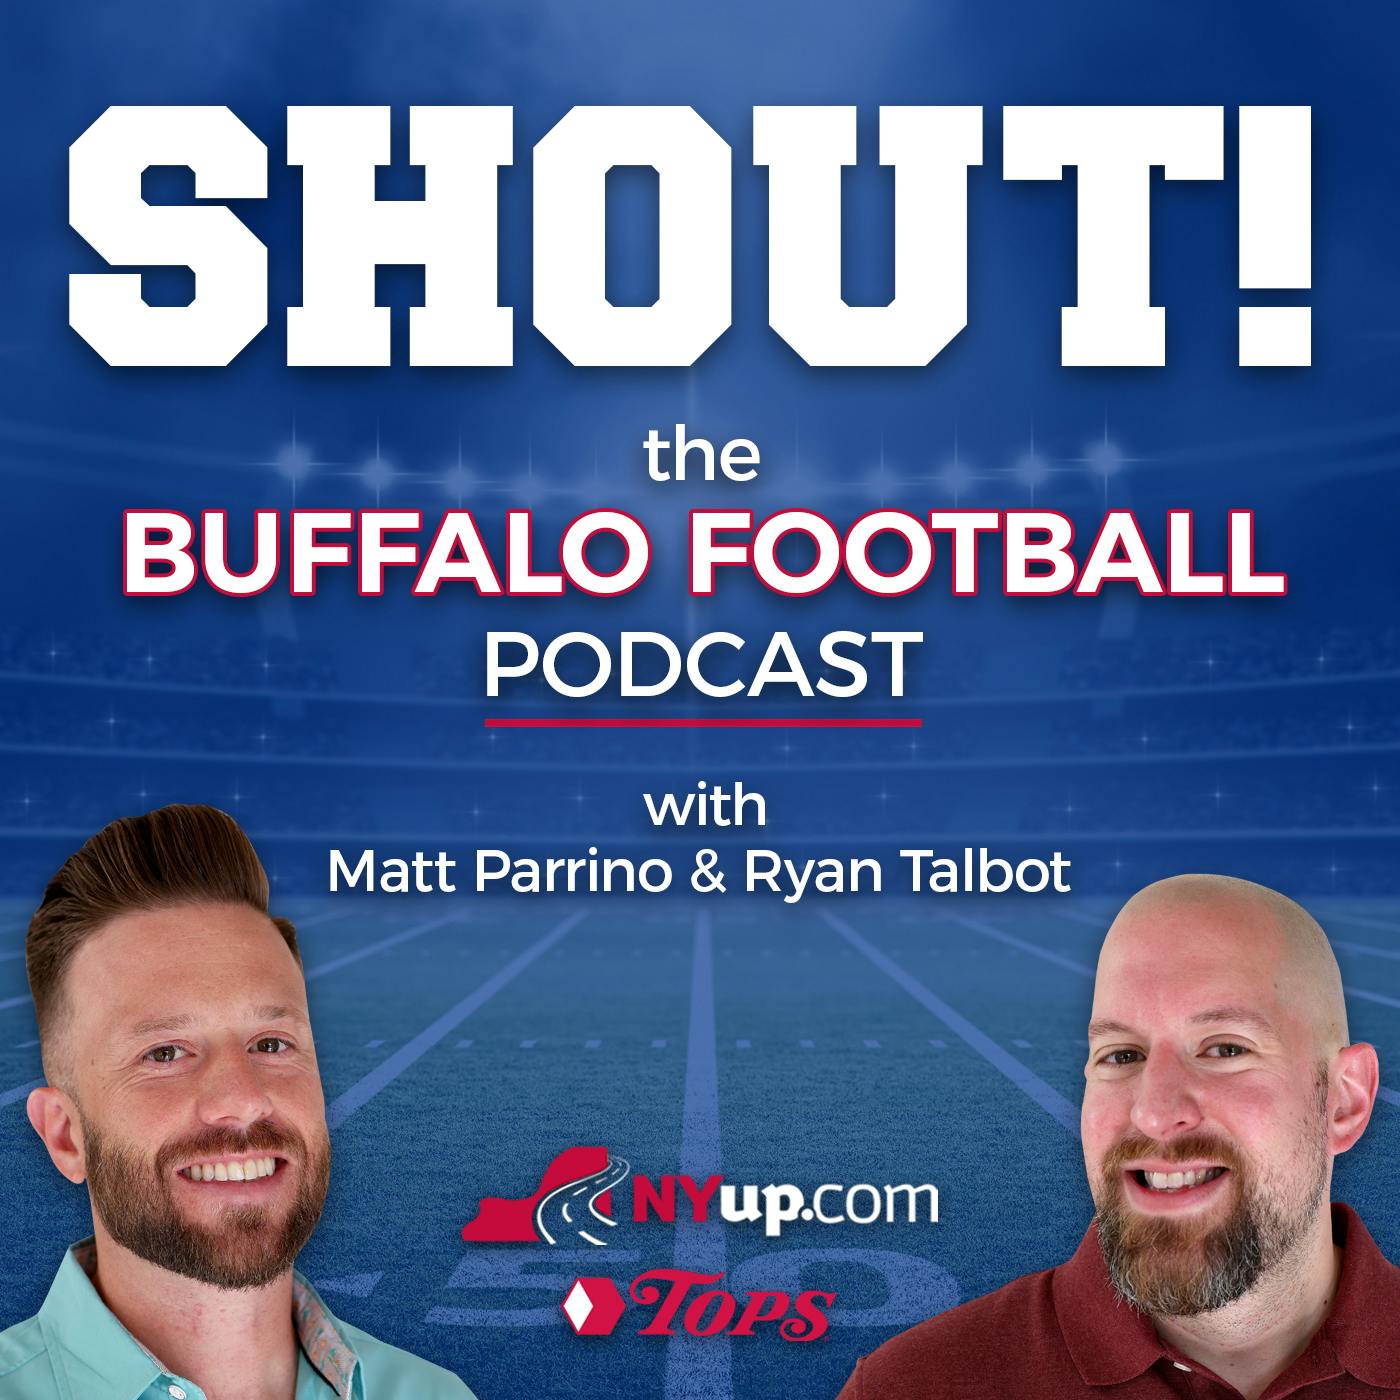 Ed Oliver & Leonard Floyd rough up Bills offensive line on Day 6 of camp: LB shuffle continues & Dion Dawkins gives great insight on battles vs. edge rushers